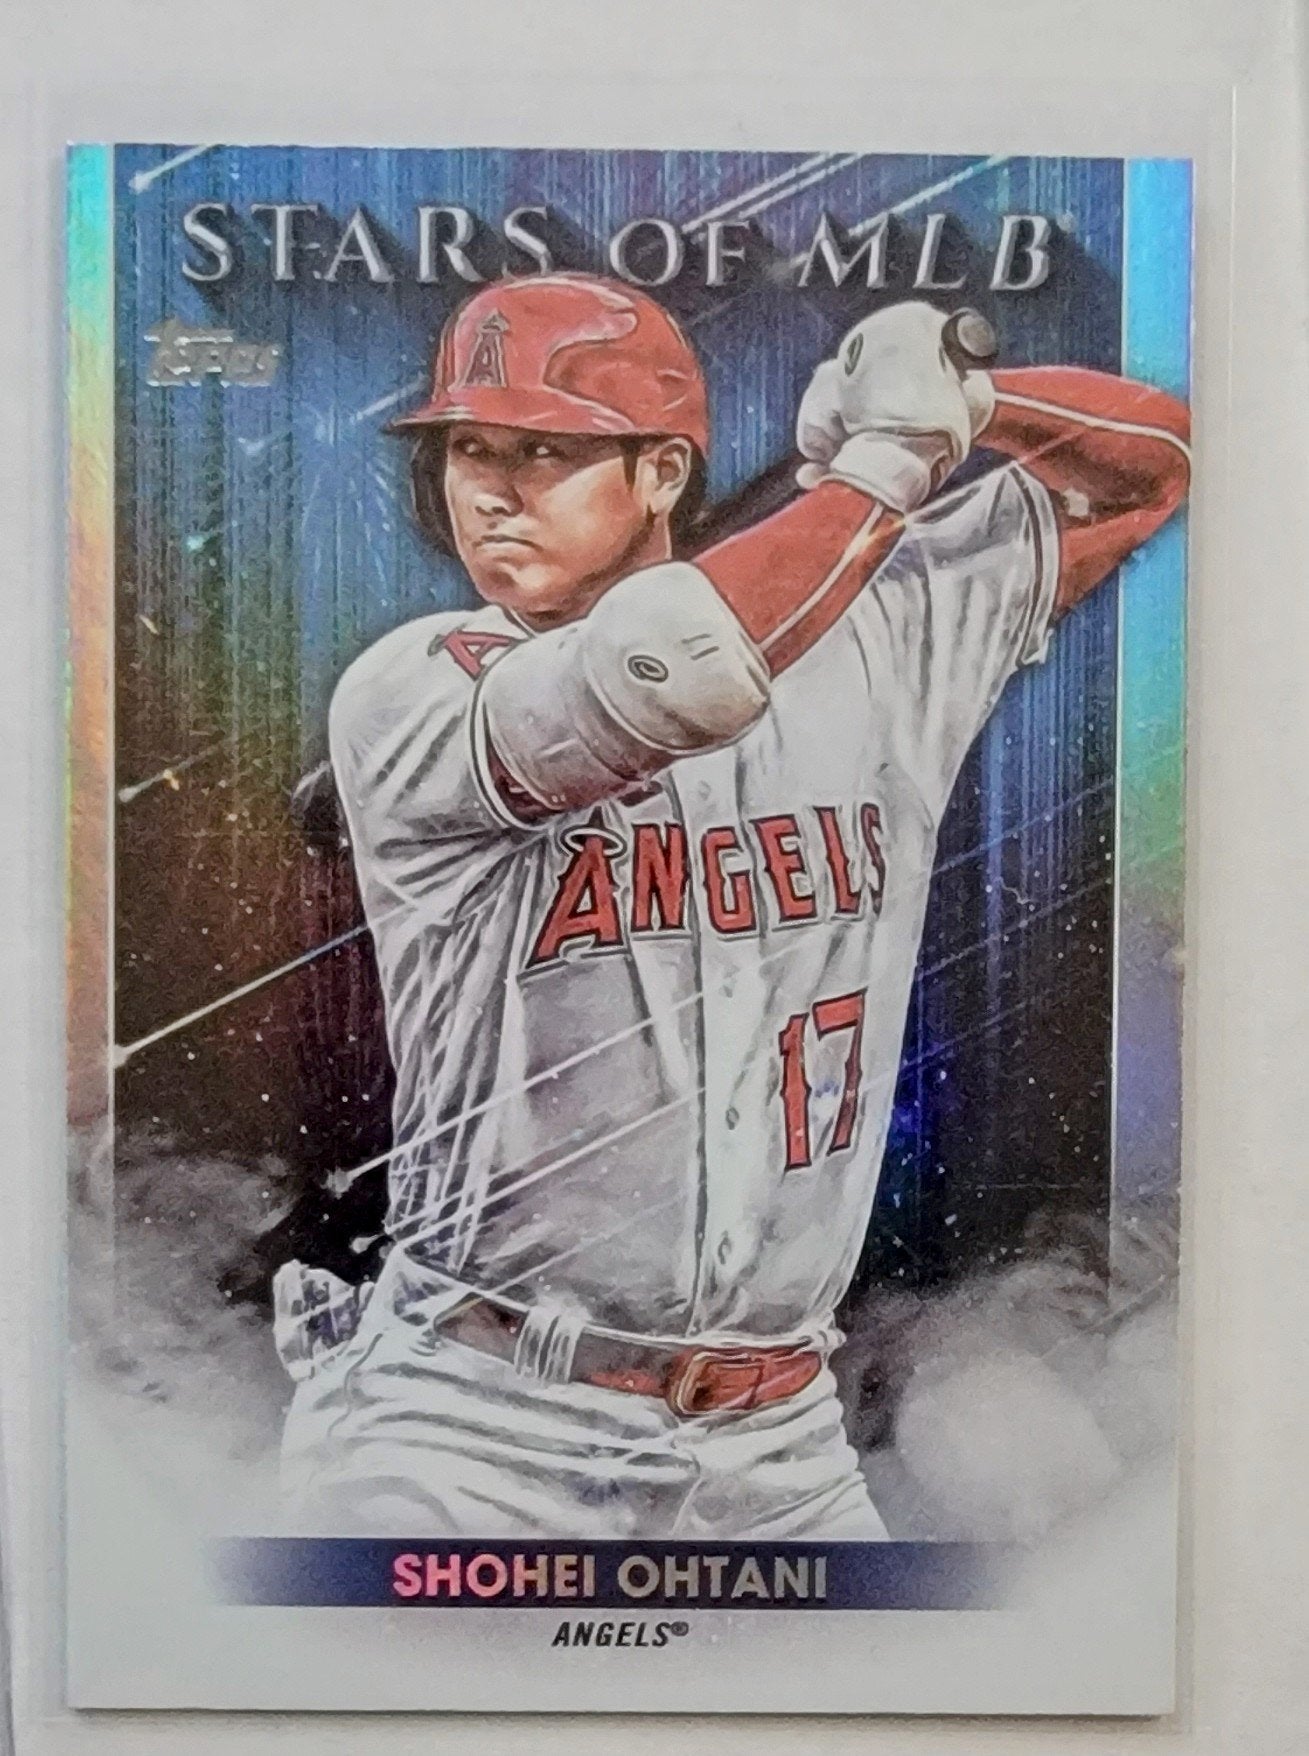 2022 Topps Shohei Ohtani Stars Of The MLB Foil Insert Baseball Card AVM1 simple Xclusive Collectibles   